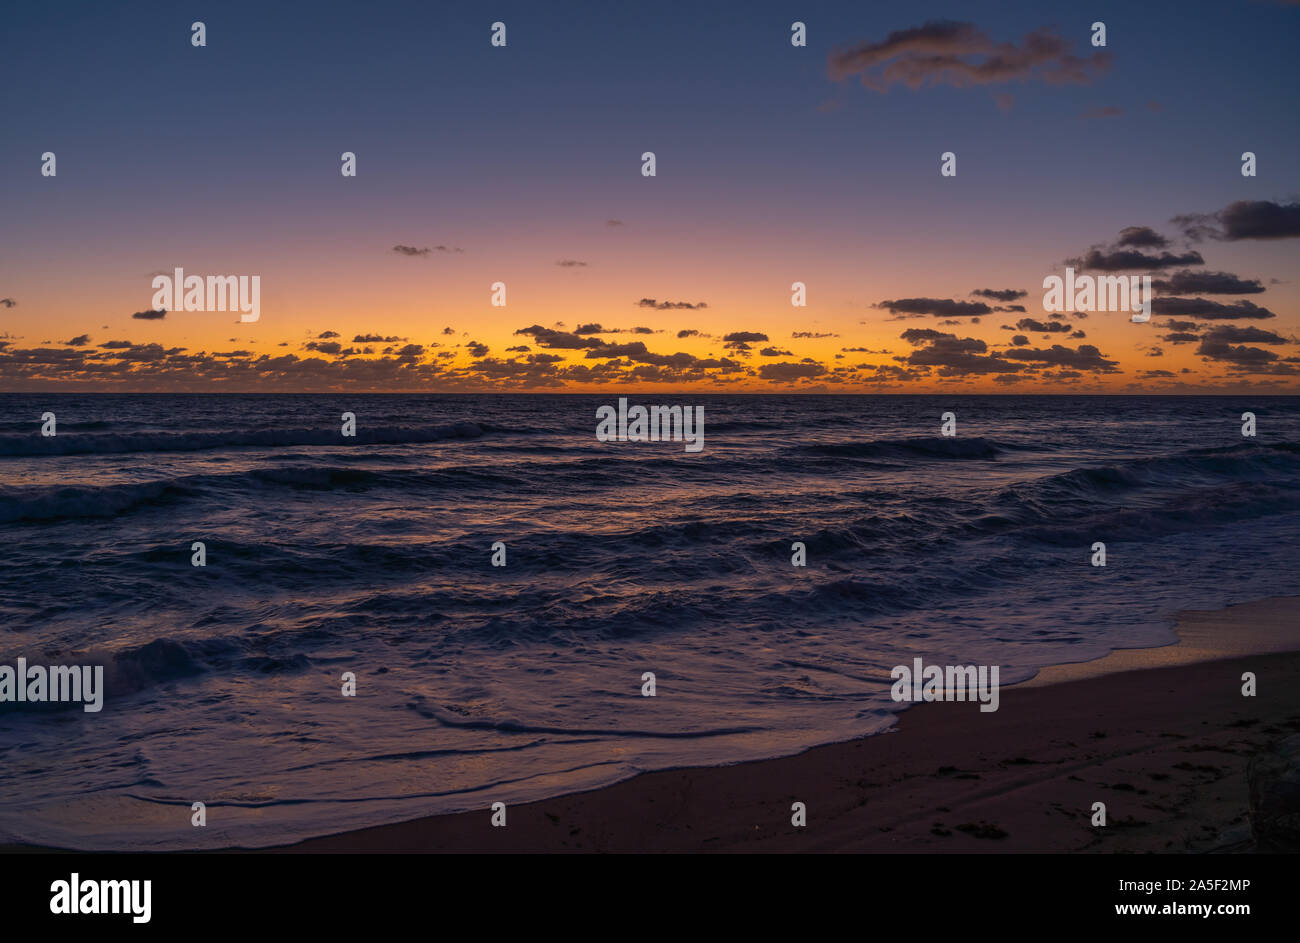 The sky glows brightly orange prior to the sunrise on the beach in Florida Stock Photo